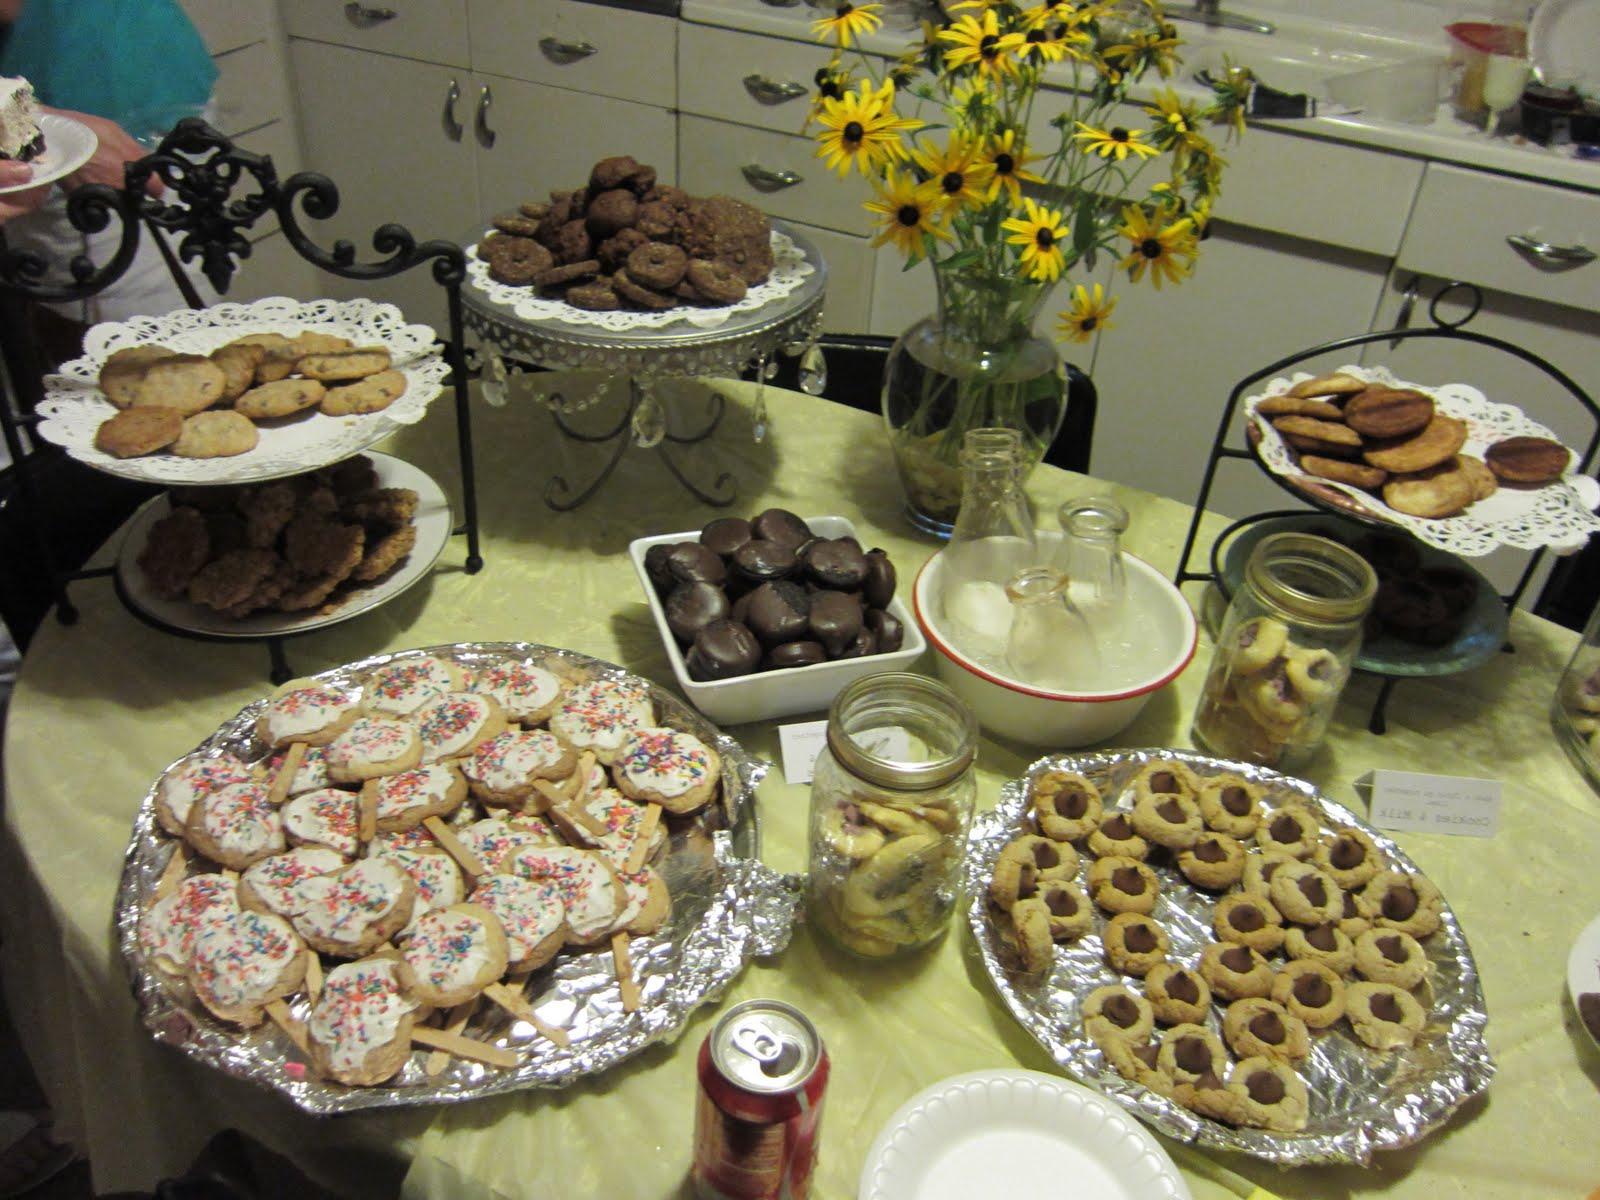 And the cherished cookie bar!